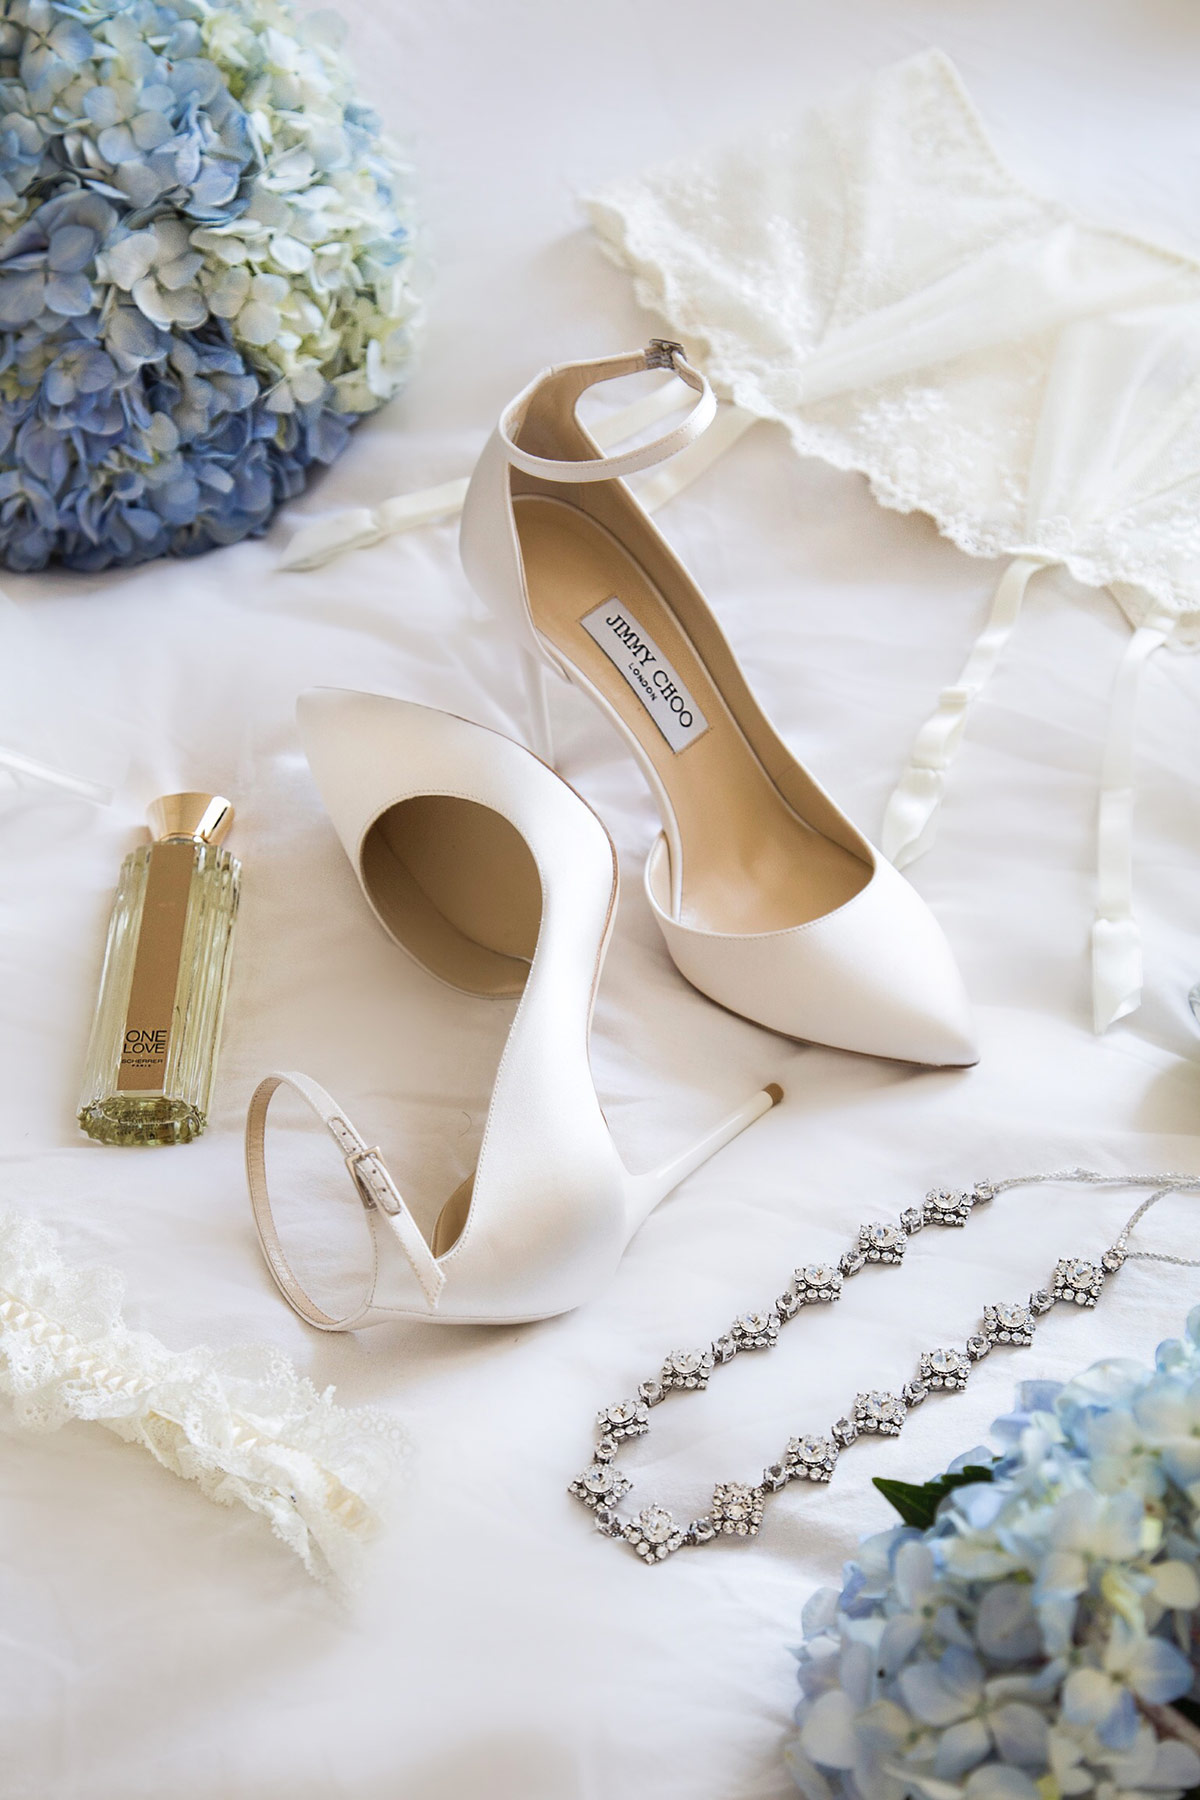 Bridal Essentials - Now that you found your bridal gown, the next step is choosing the finishing touches. Read on for my bridal essentials checklist and advice on picking the perfect accessories.